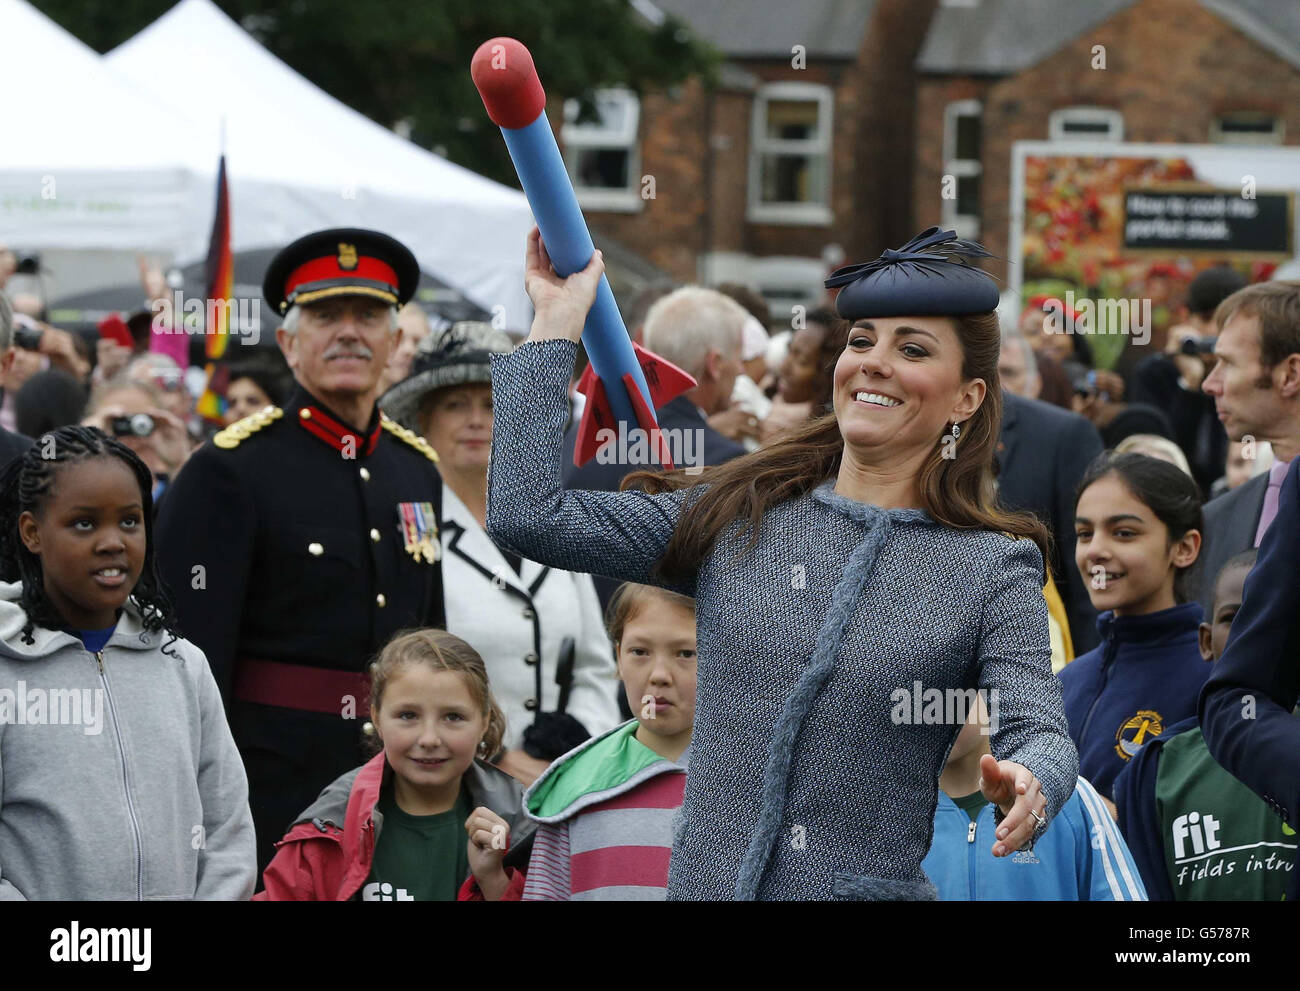 The Duchess of Cambridge throws a foam javelin at a children's sports event, during her visit to Vernon Park in Nottingham. Stock Photo